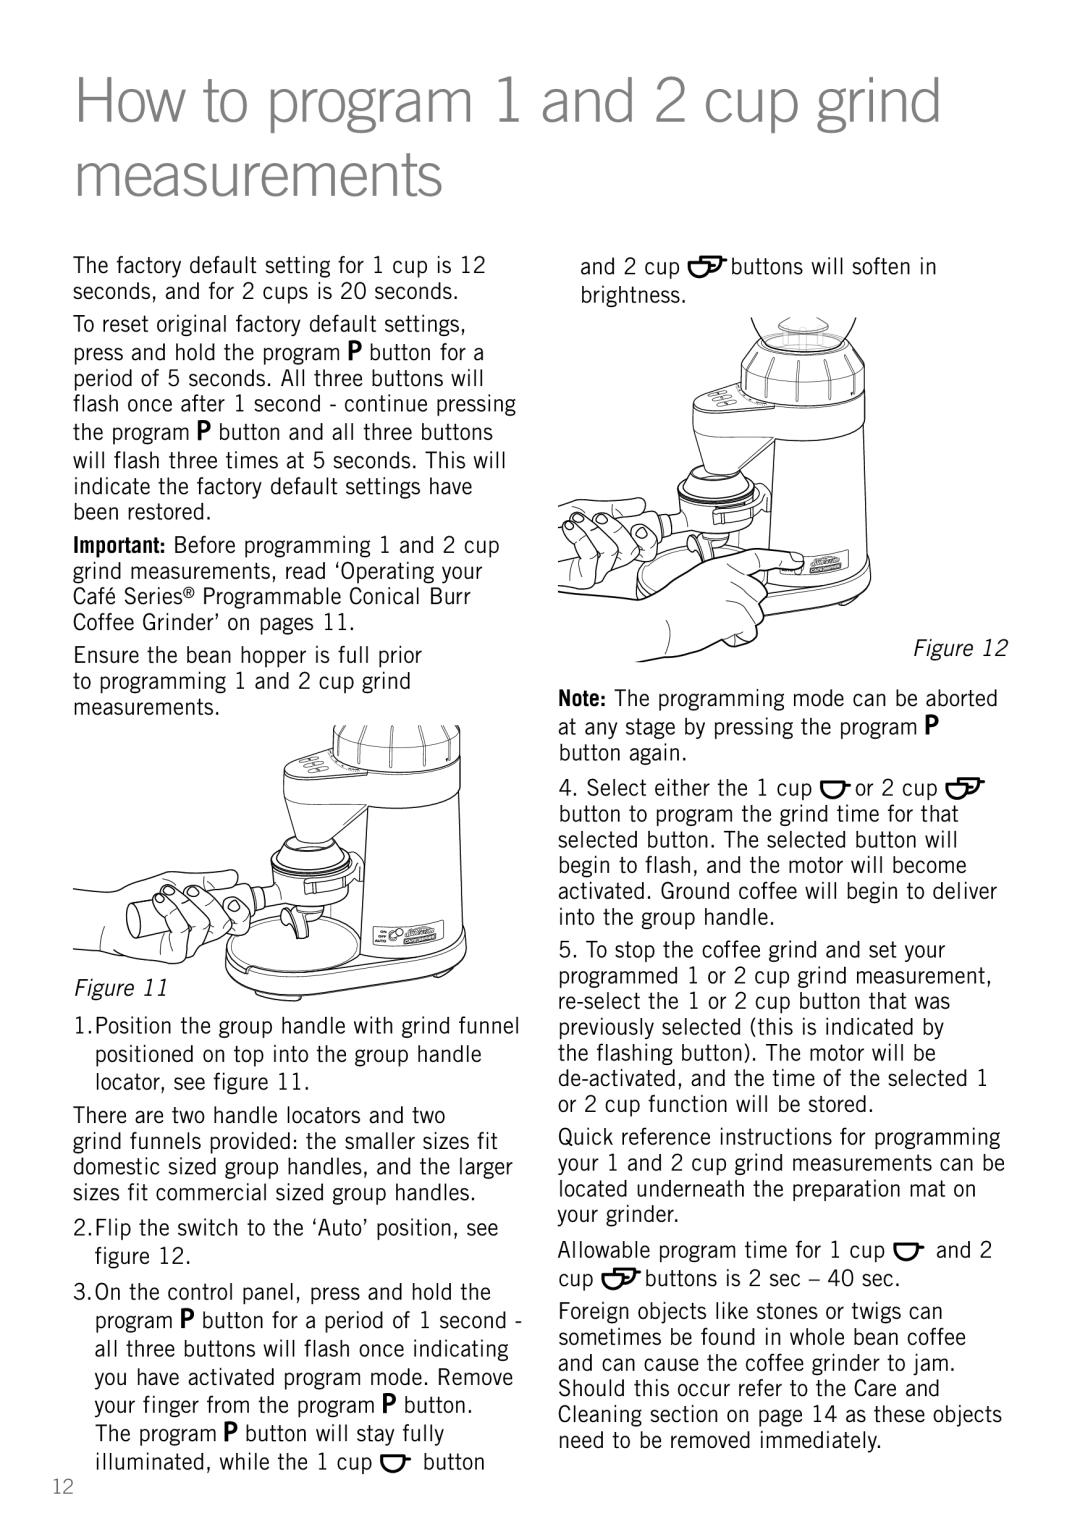 Sunbeam EM0490 manual How to program 1 and 2 cup grind measurements 